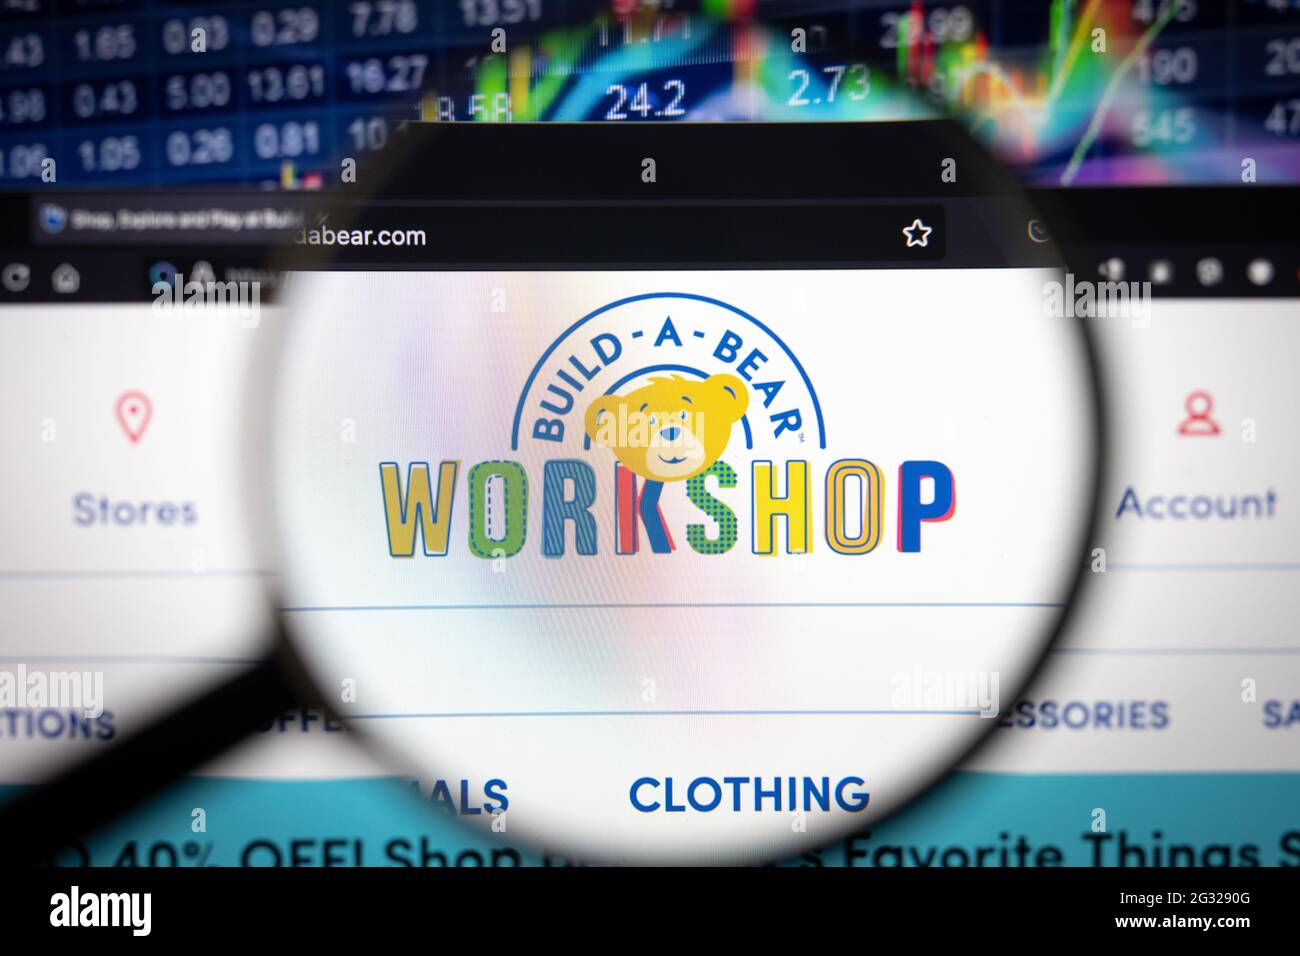 Build a Bear Workshop company logo on a website with blurry stock market developments in the background, seen on a computer screen Stock Photo